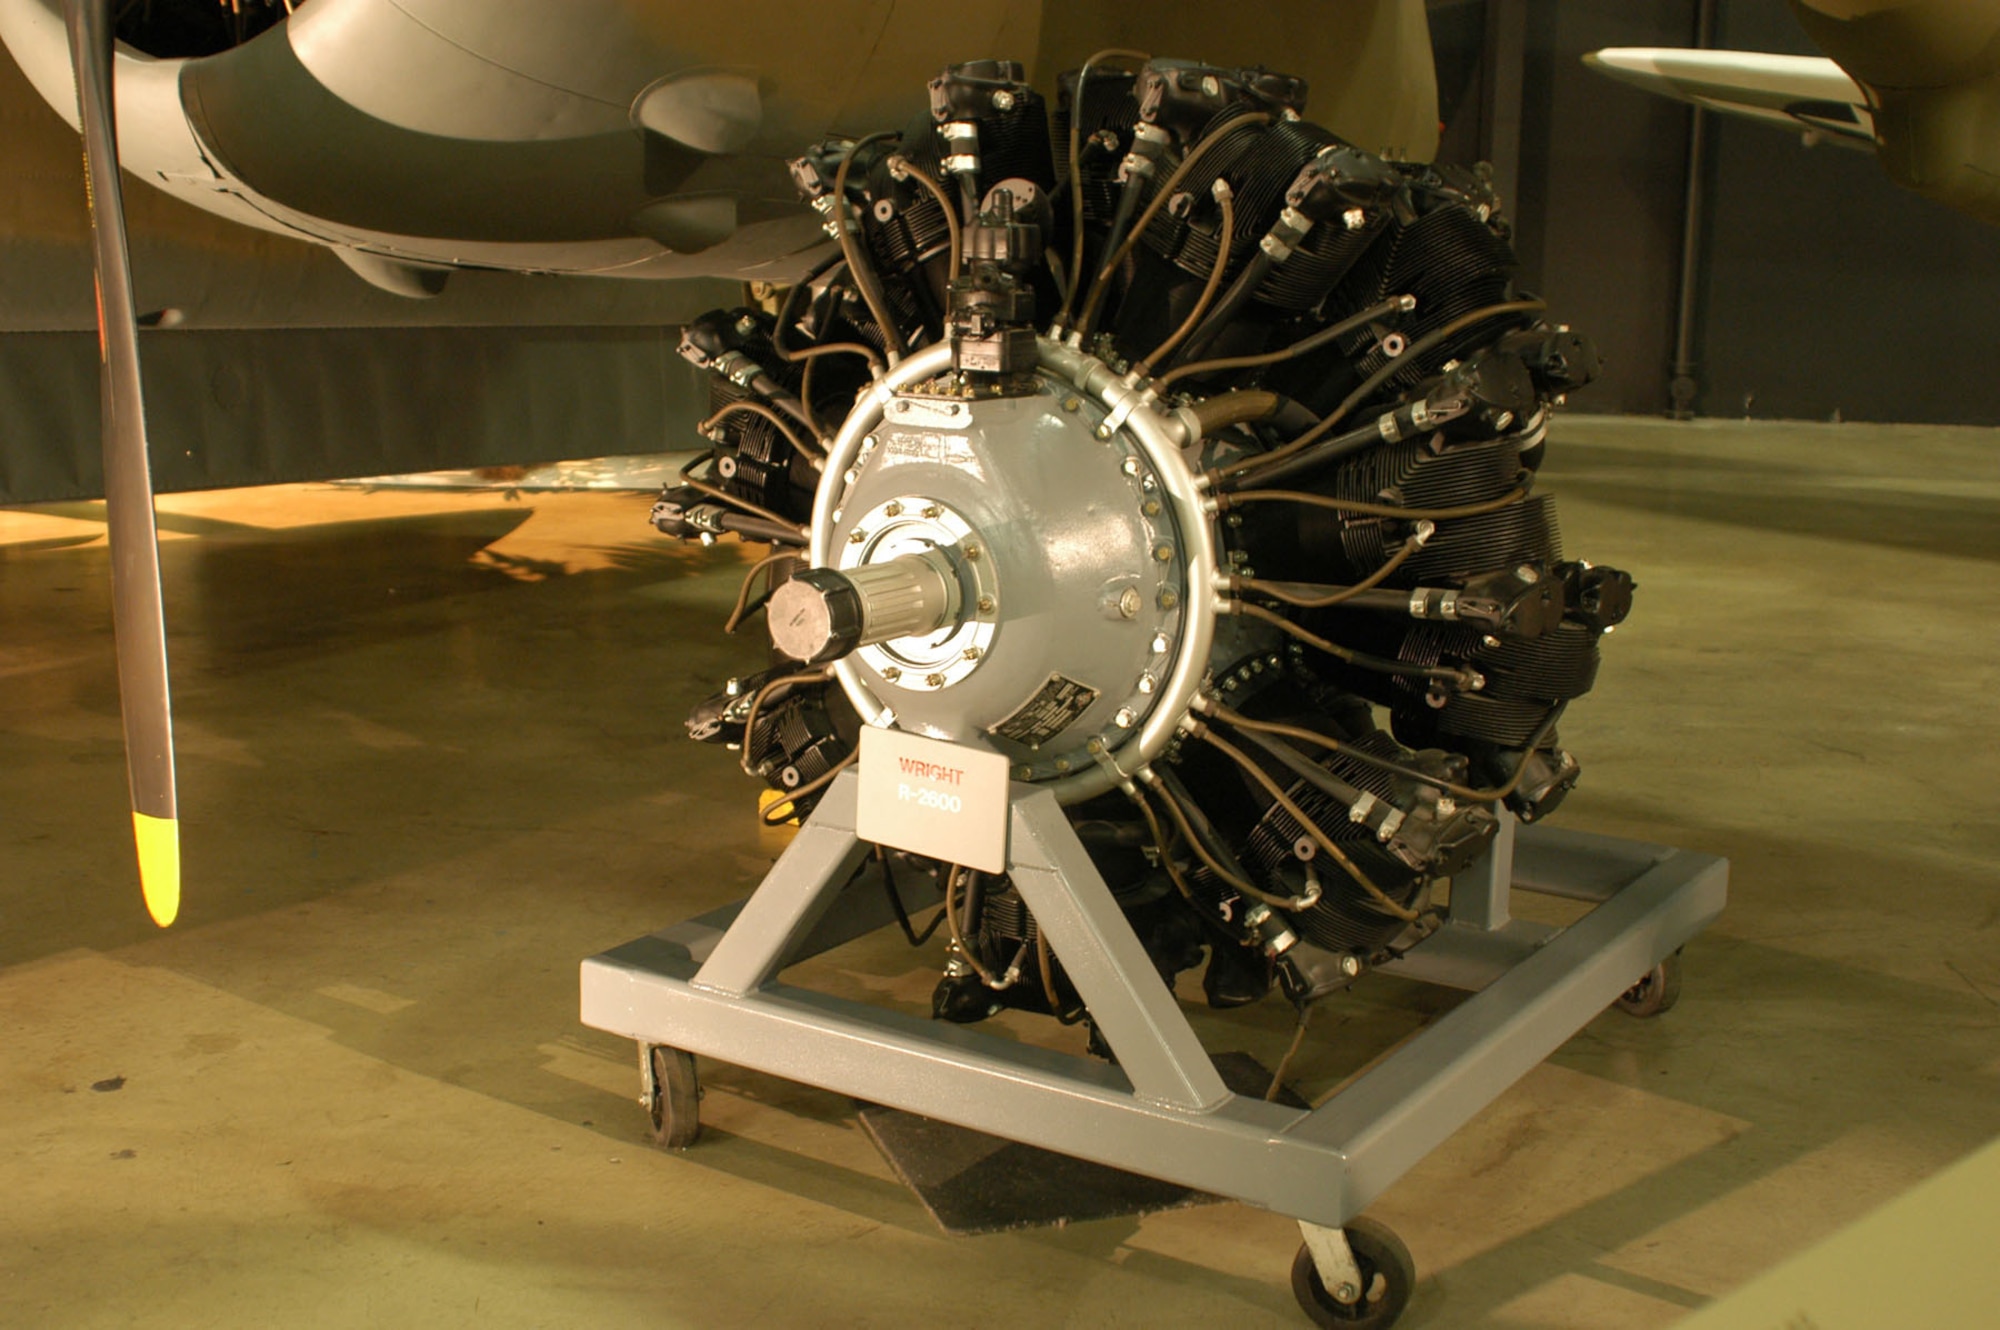 DAYTON, Ohio -- Wright R-2600 on display in the World War II Gallery at the National Museum of the United States Air Force. (U.S. Air Force photo)